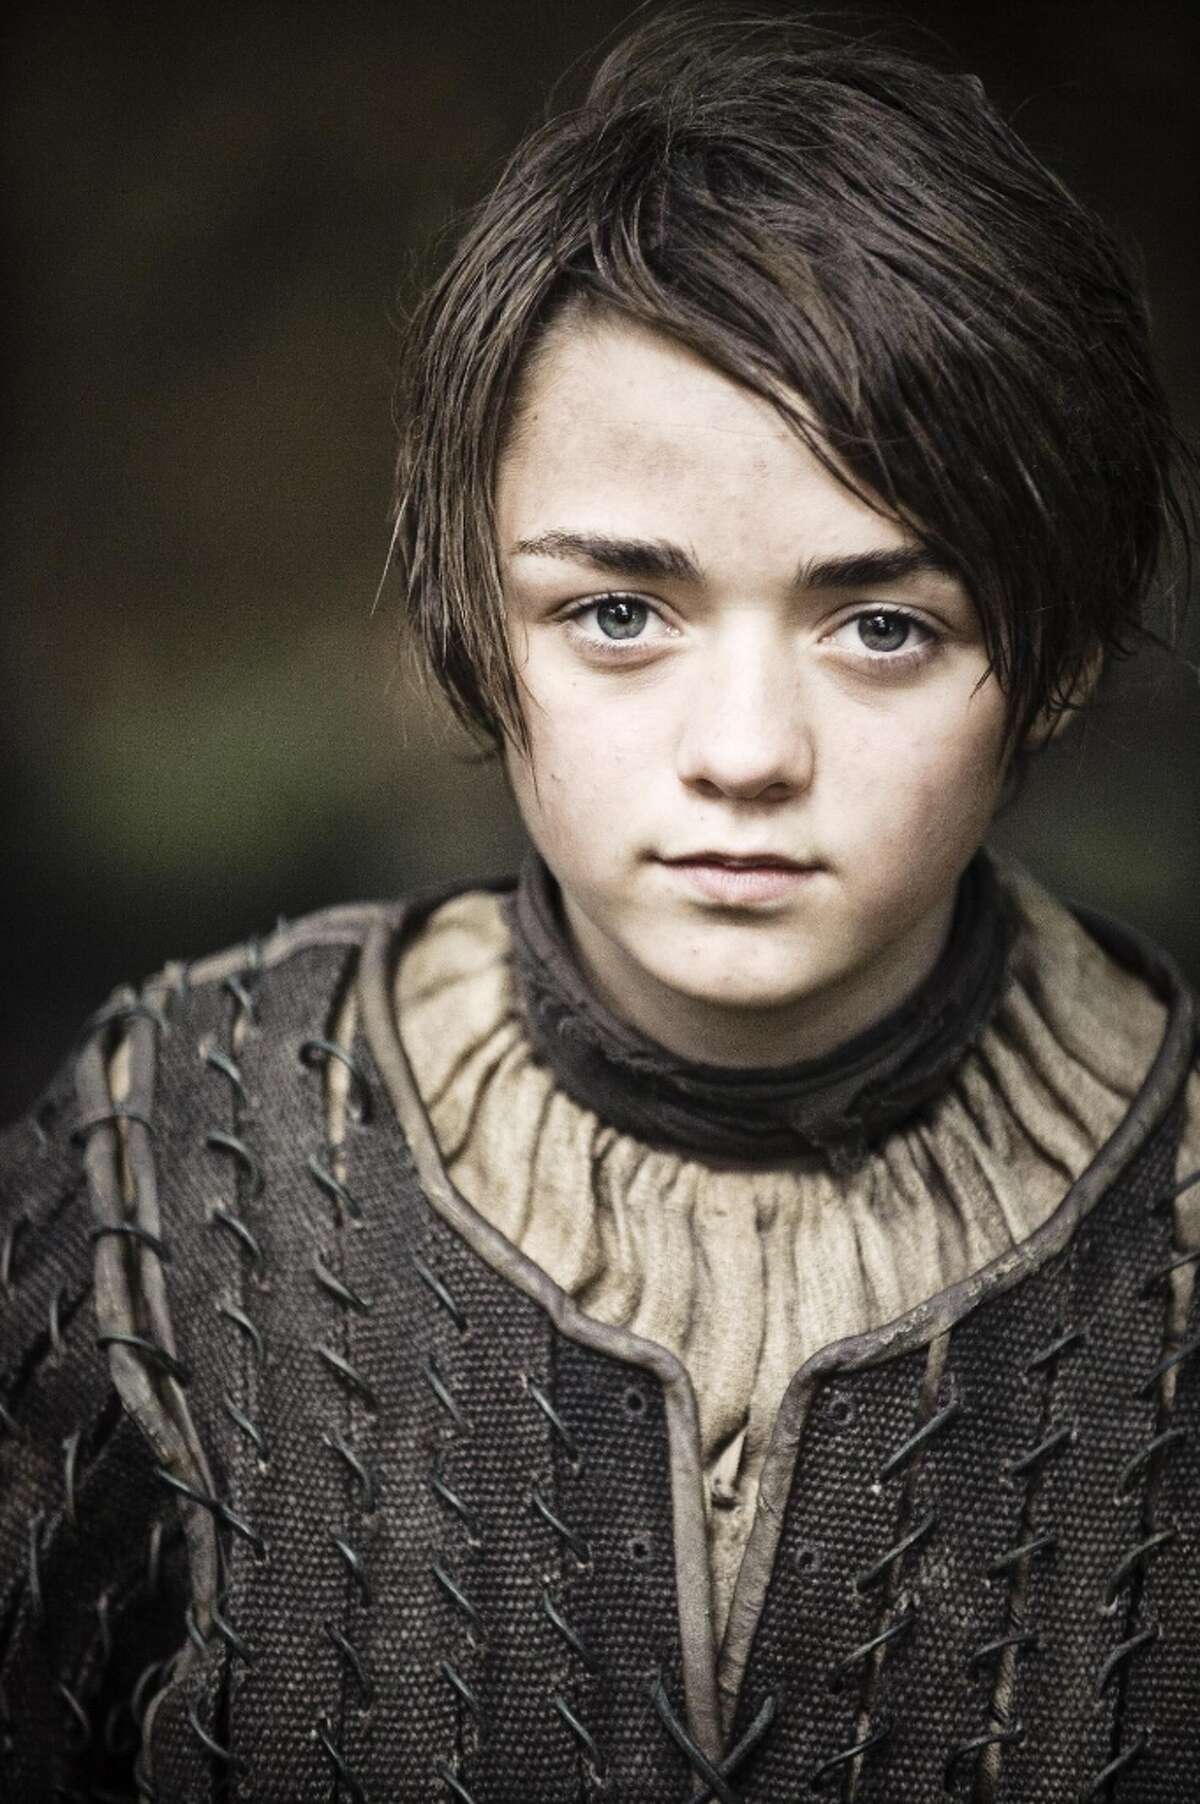 Arya Stark: Following the murder of her brother, Robb, and mother Catelyn, at the Red Wedding, she’s running short on family. She’s traveling from the ill-fated wedding in the company of Sandor “the Hound” Clegane. And she’s feeling vengeful. “Valar morghulis.”